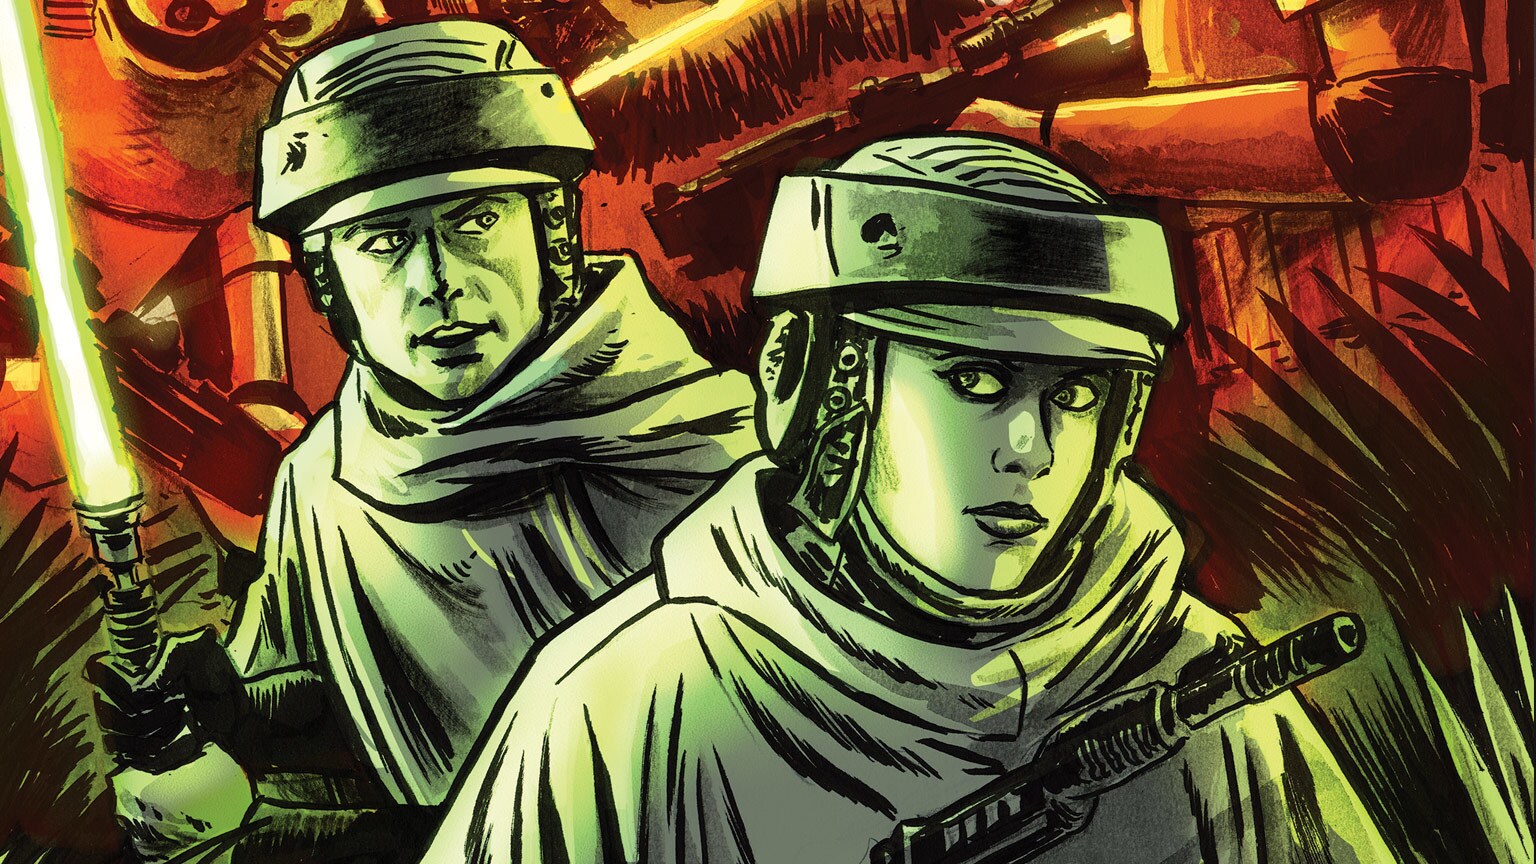 The Skywalker Twins Explore the Galaxy in IDW's Star Wars Adventures #7 - Exclusive Preview